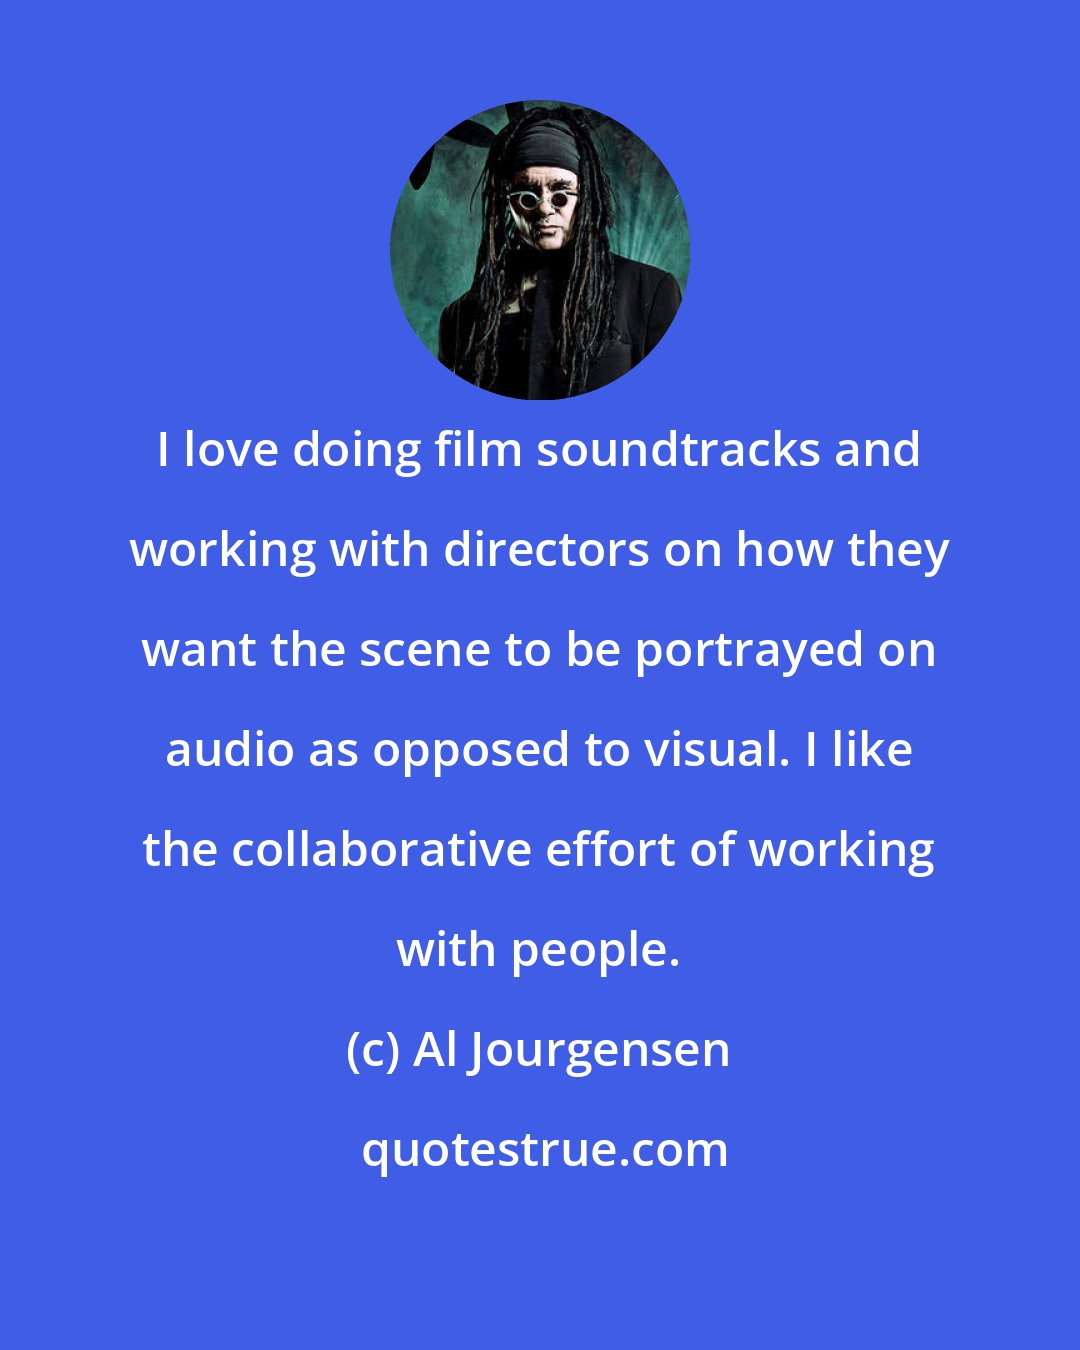 Al Jourgensen: I love doing film soundtracks and working with directors on how they want the scene to be portrayed on audio as opposed to visual. I like the collaborative effort of working with people.